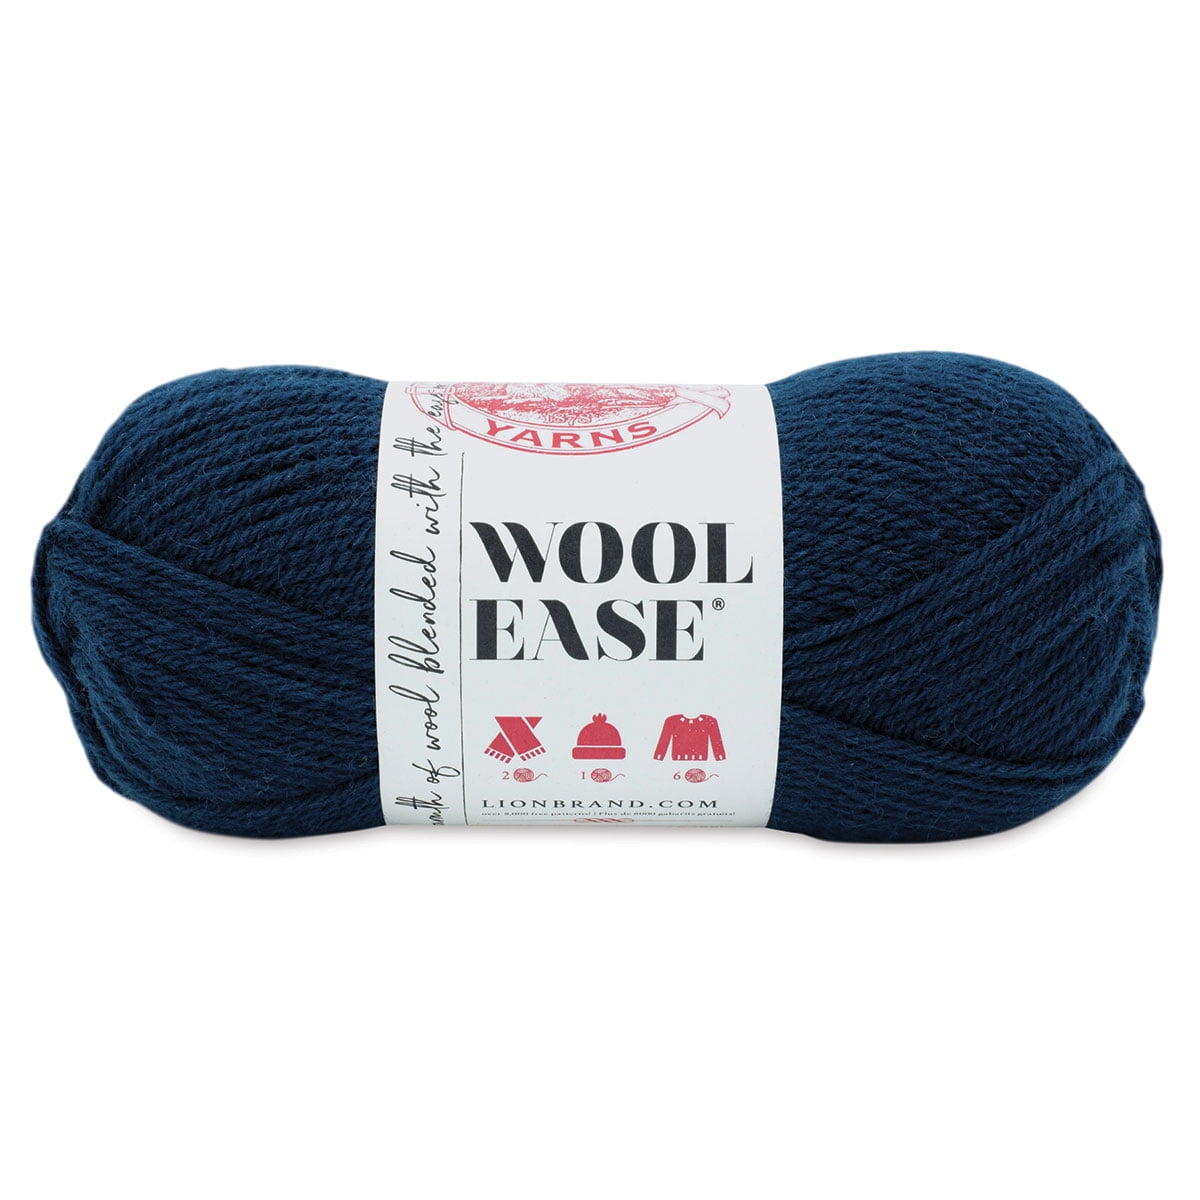 Lion Brand Wool-Ease Thick & Quick Yarn - Blue Jay - 023032645148